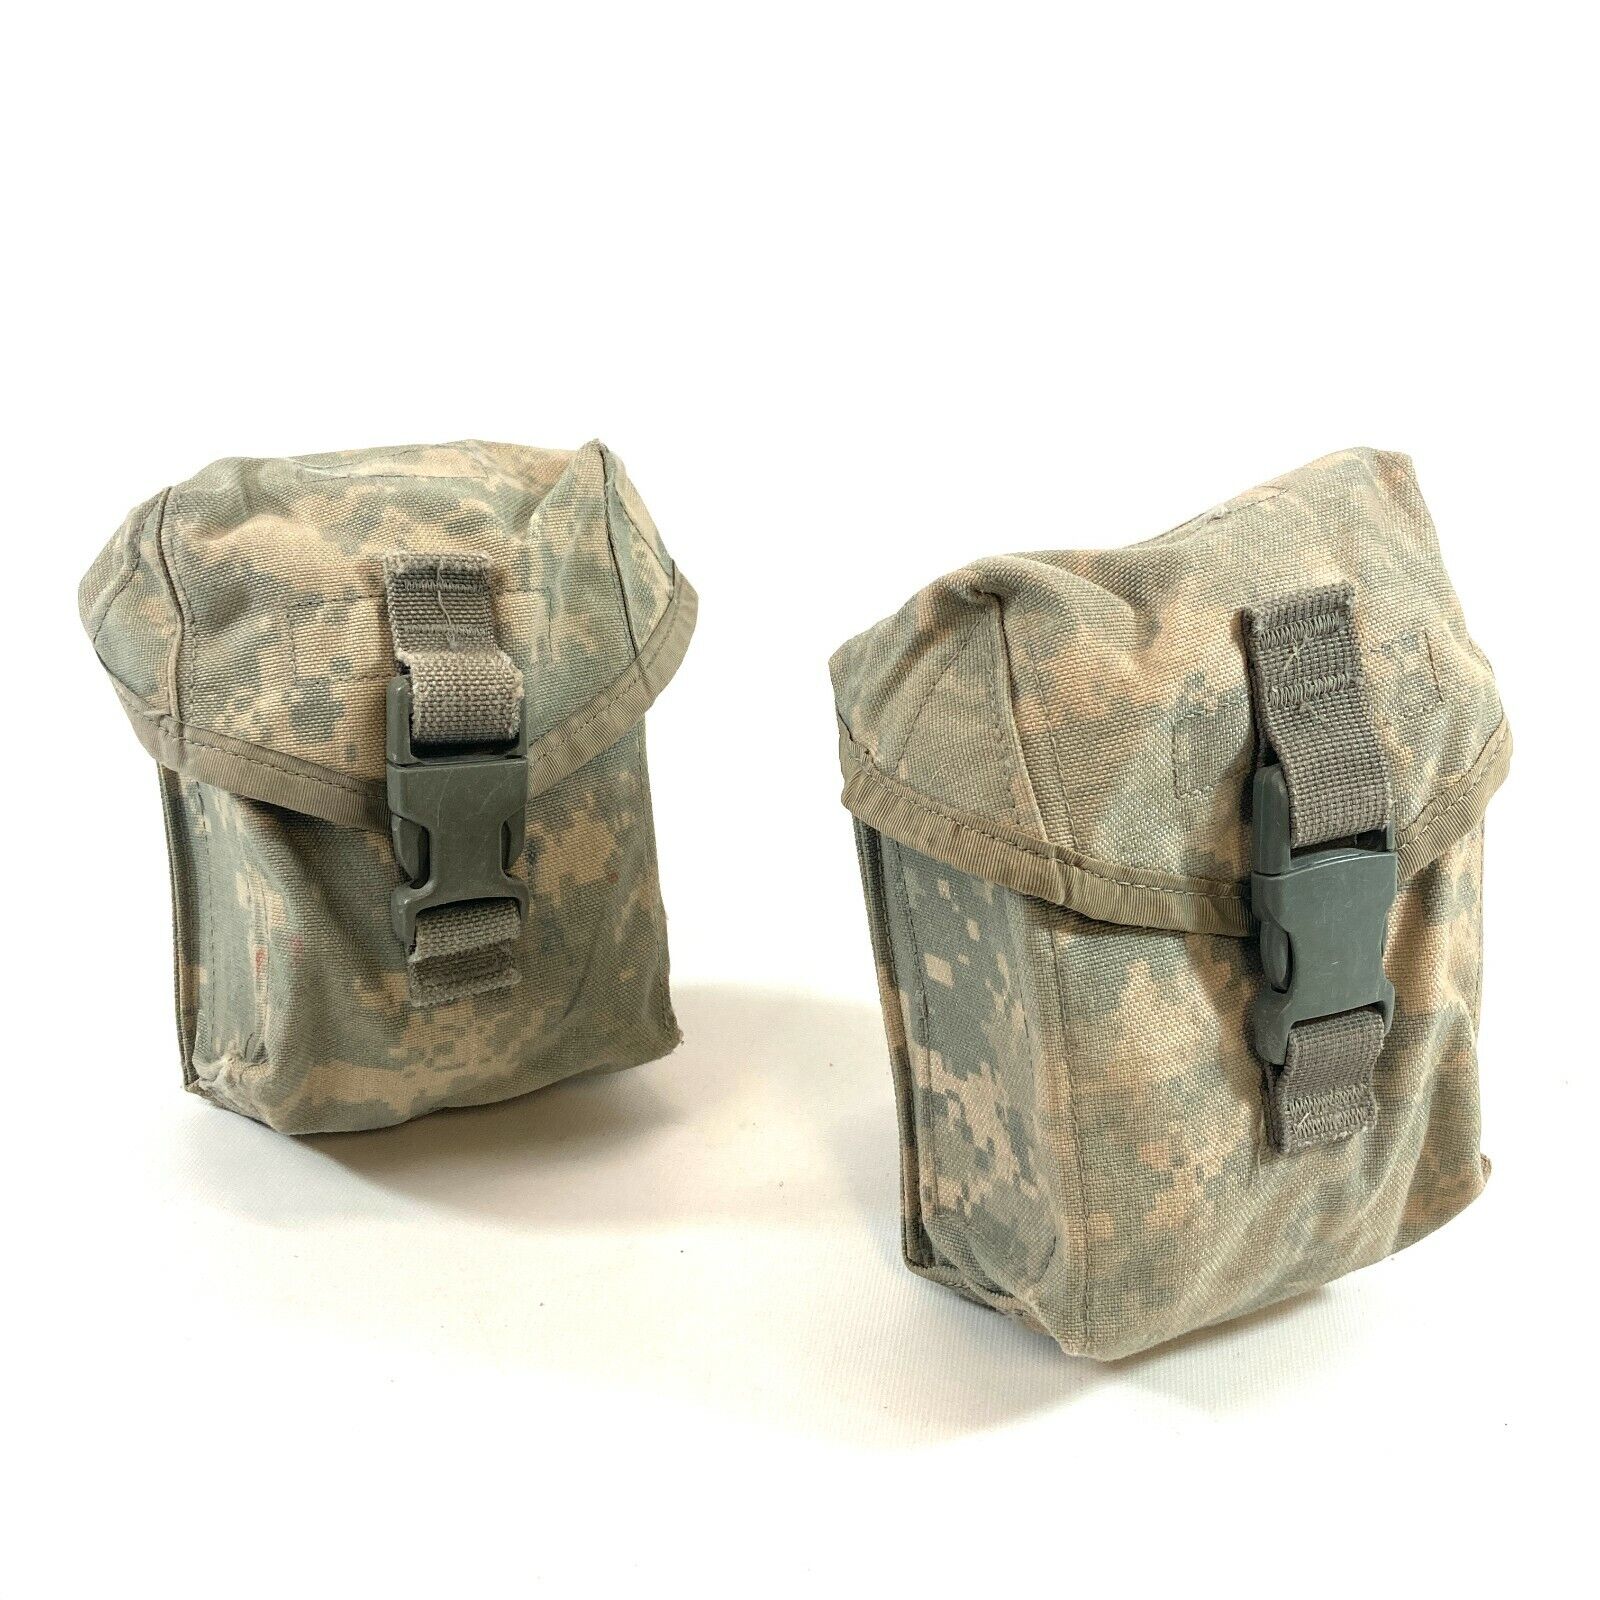 2 Military Individual First Aid Kit Pouches IFAK, ACU MOLLE Medical Pouch DEFECT USGI 6545-01-531-3647